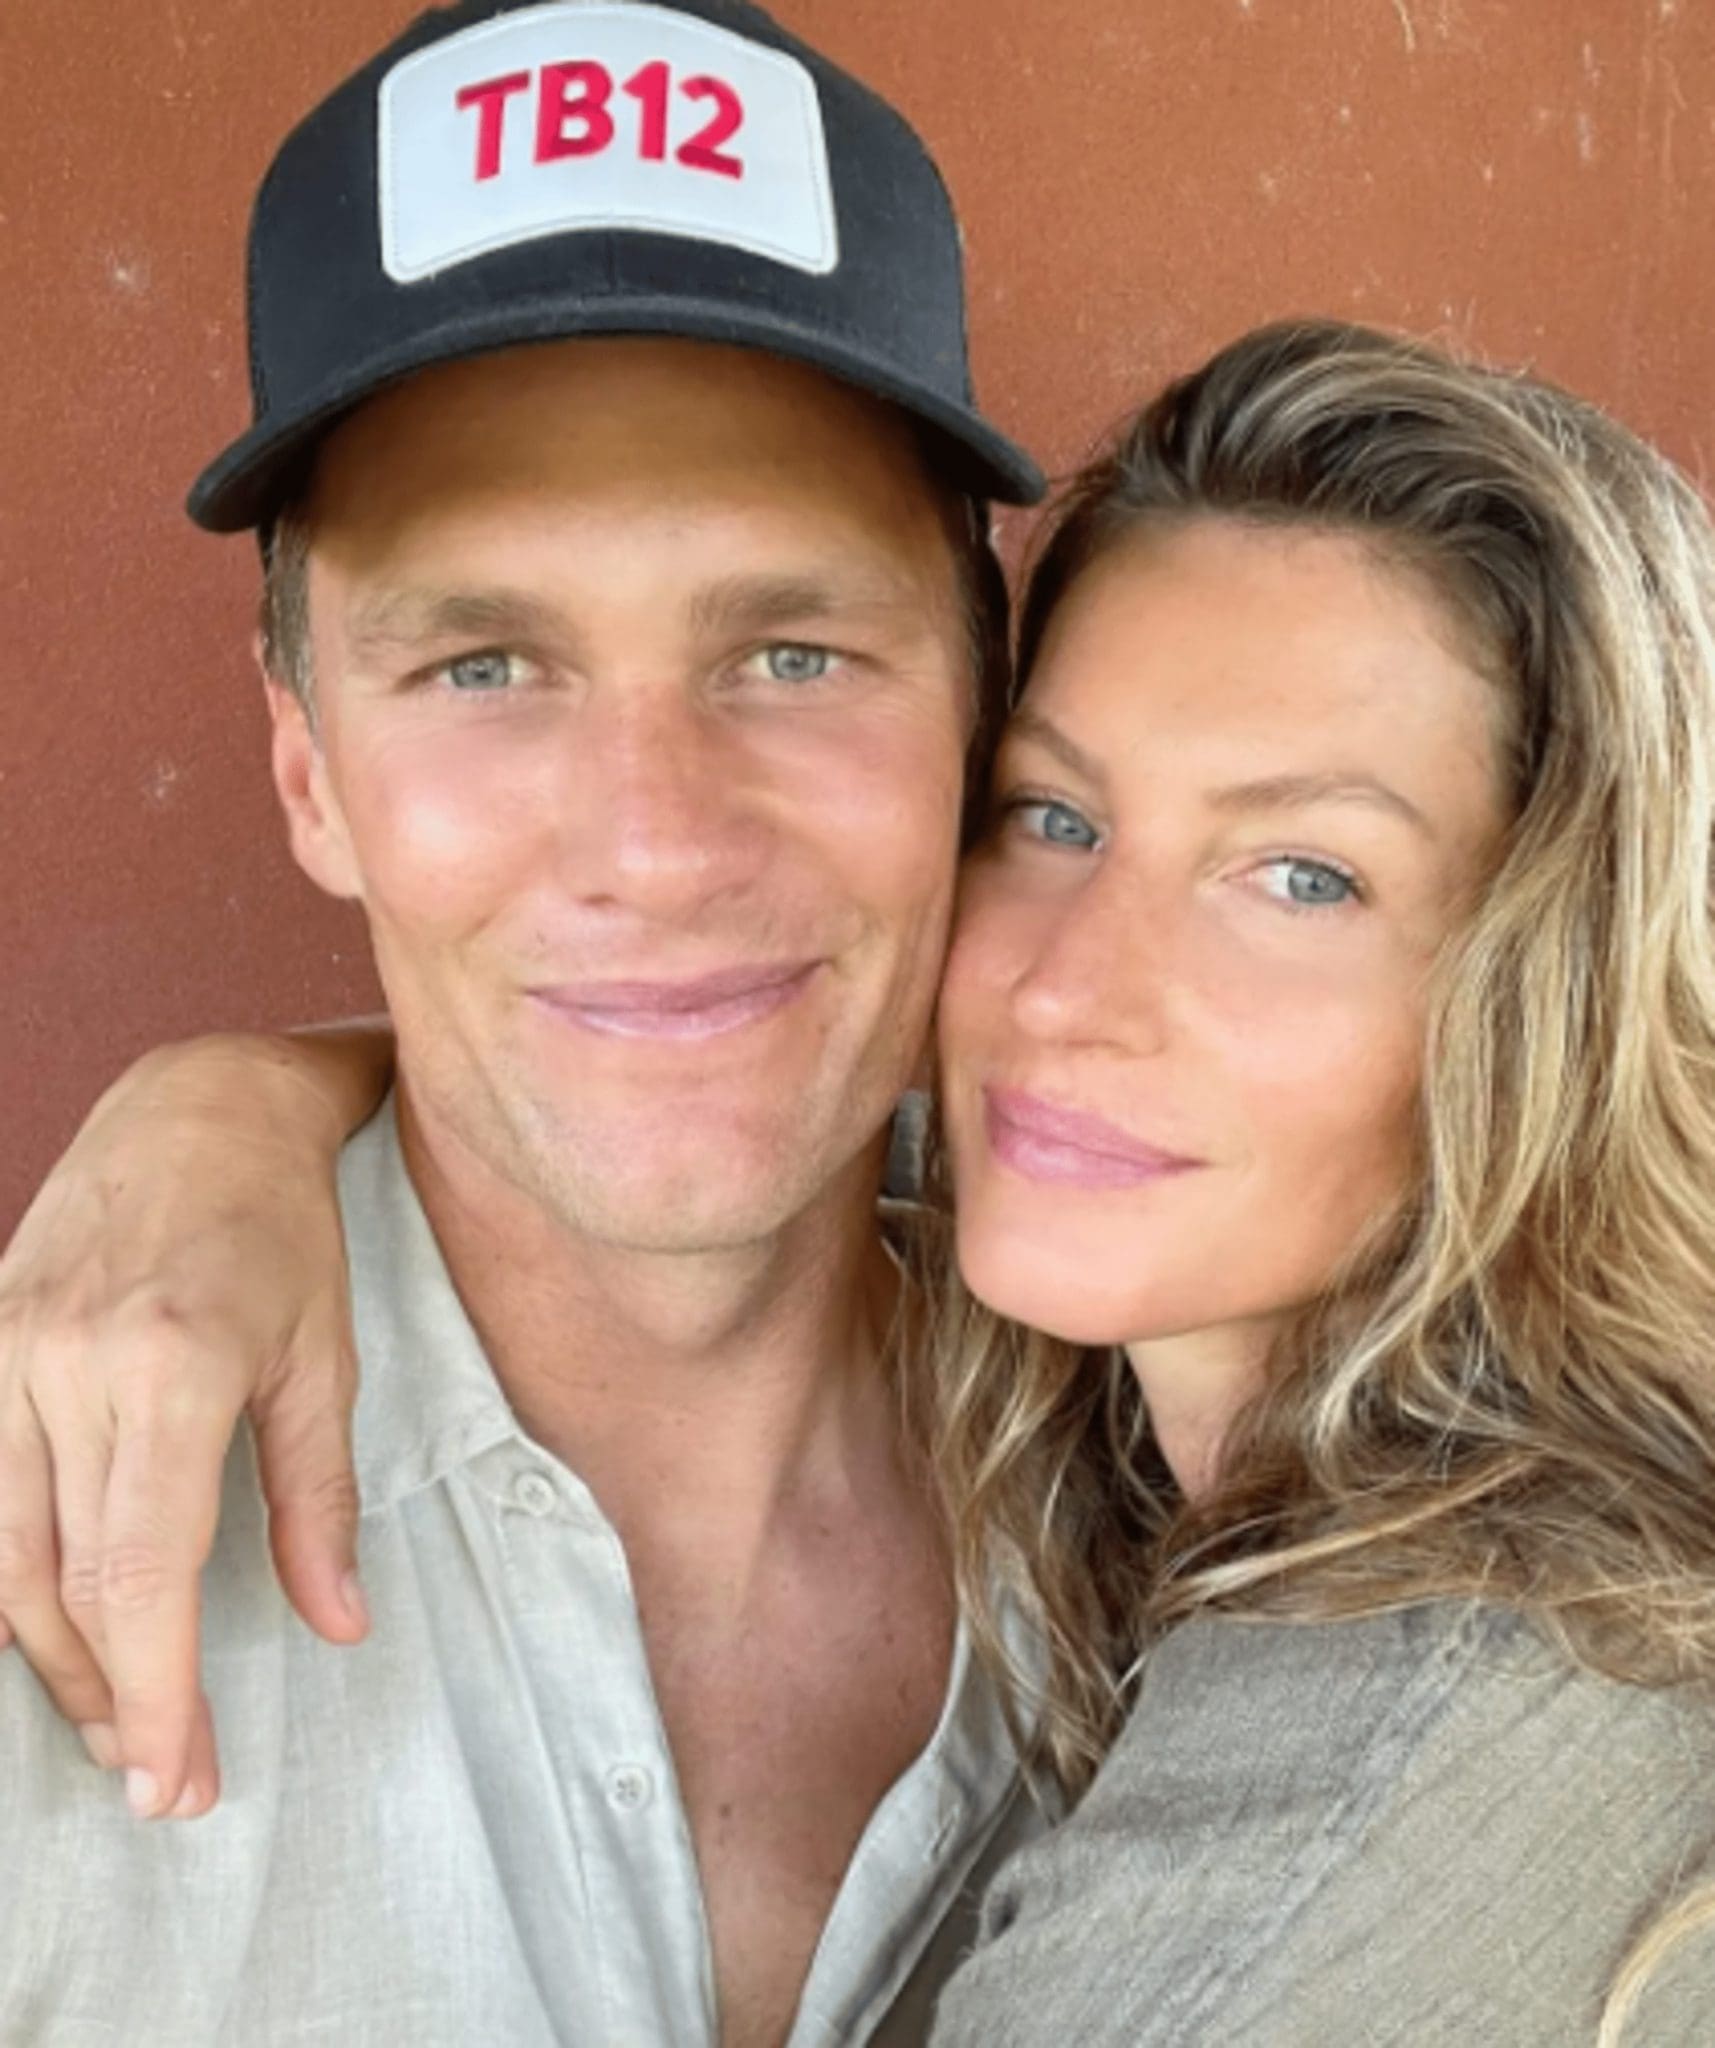 Tom Brady and Gisele Bündchen have apparently not seen each other since Gisele returned from her trip to Costa Rica